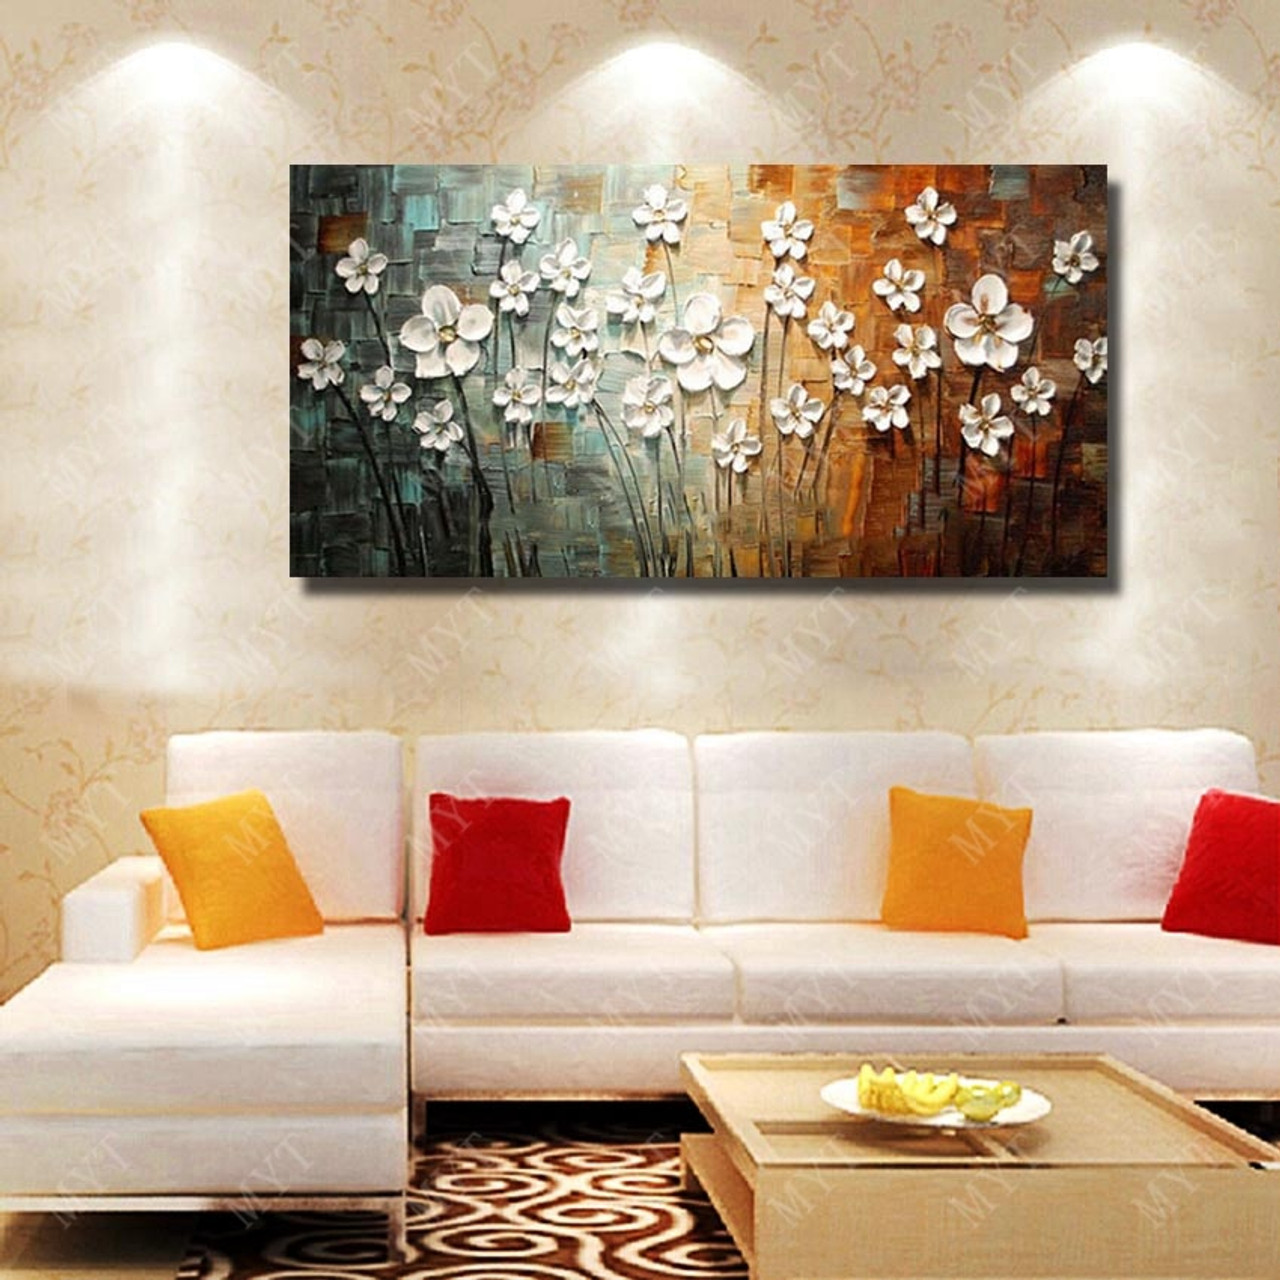 Chinese Wall Art Modern Living Room Wall Decor Flower Painting Large Canvas Art Hand Painted Wall Pictures No Framed